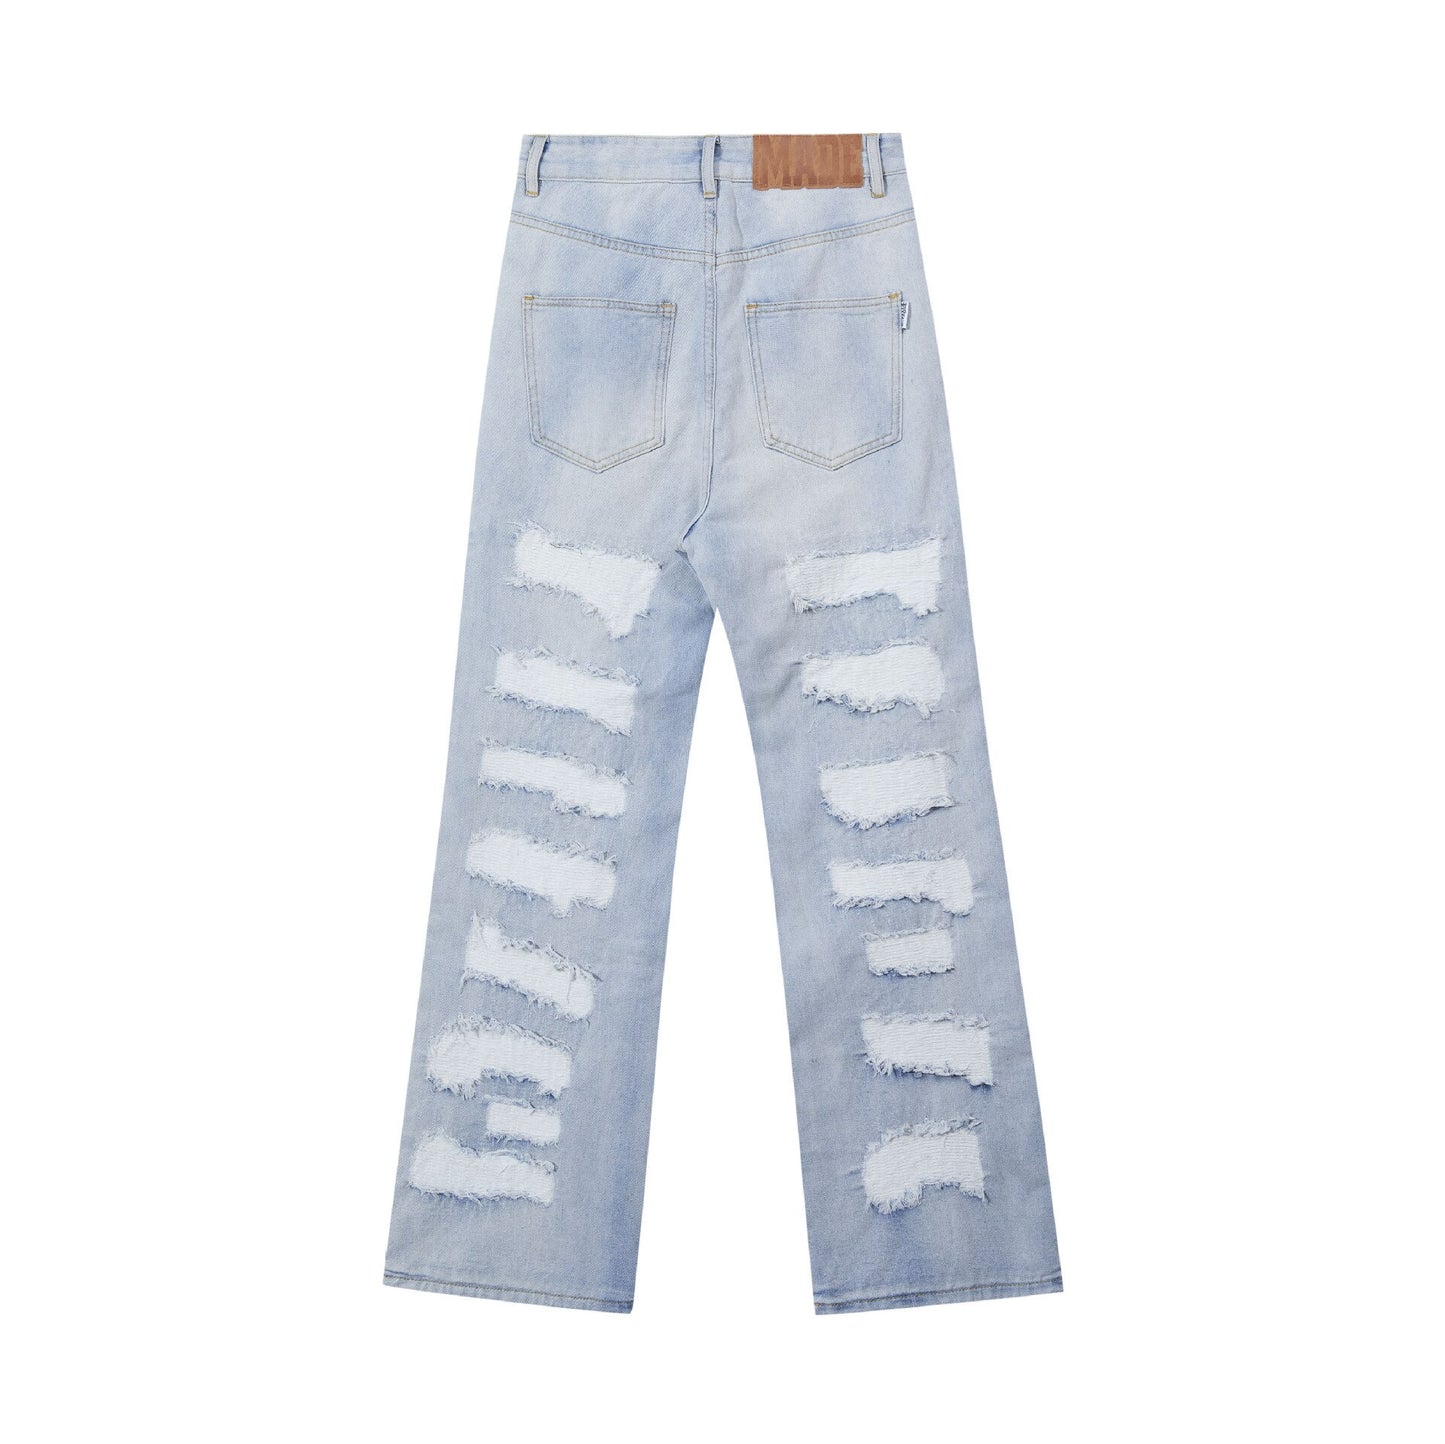 MADE EXTREME Damaged Tassels Ripped Jeans